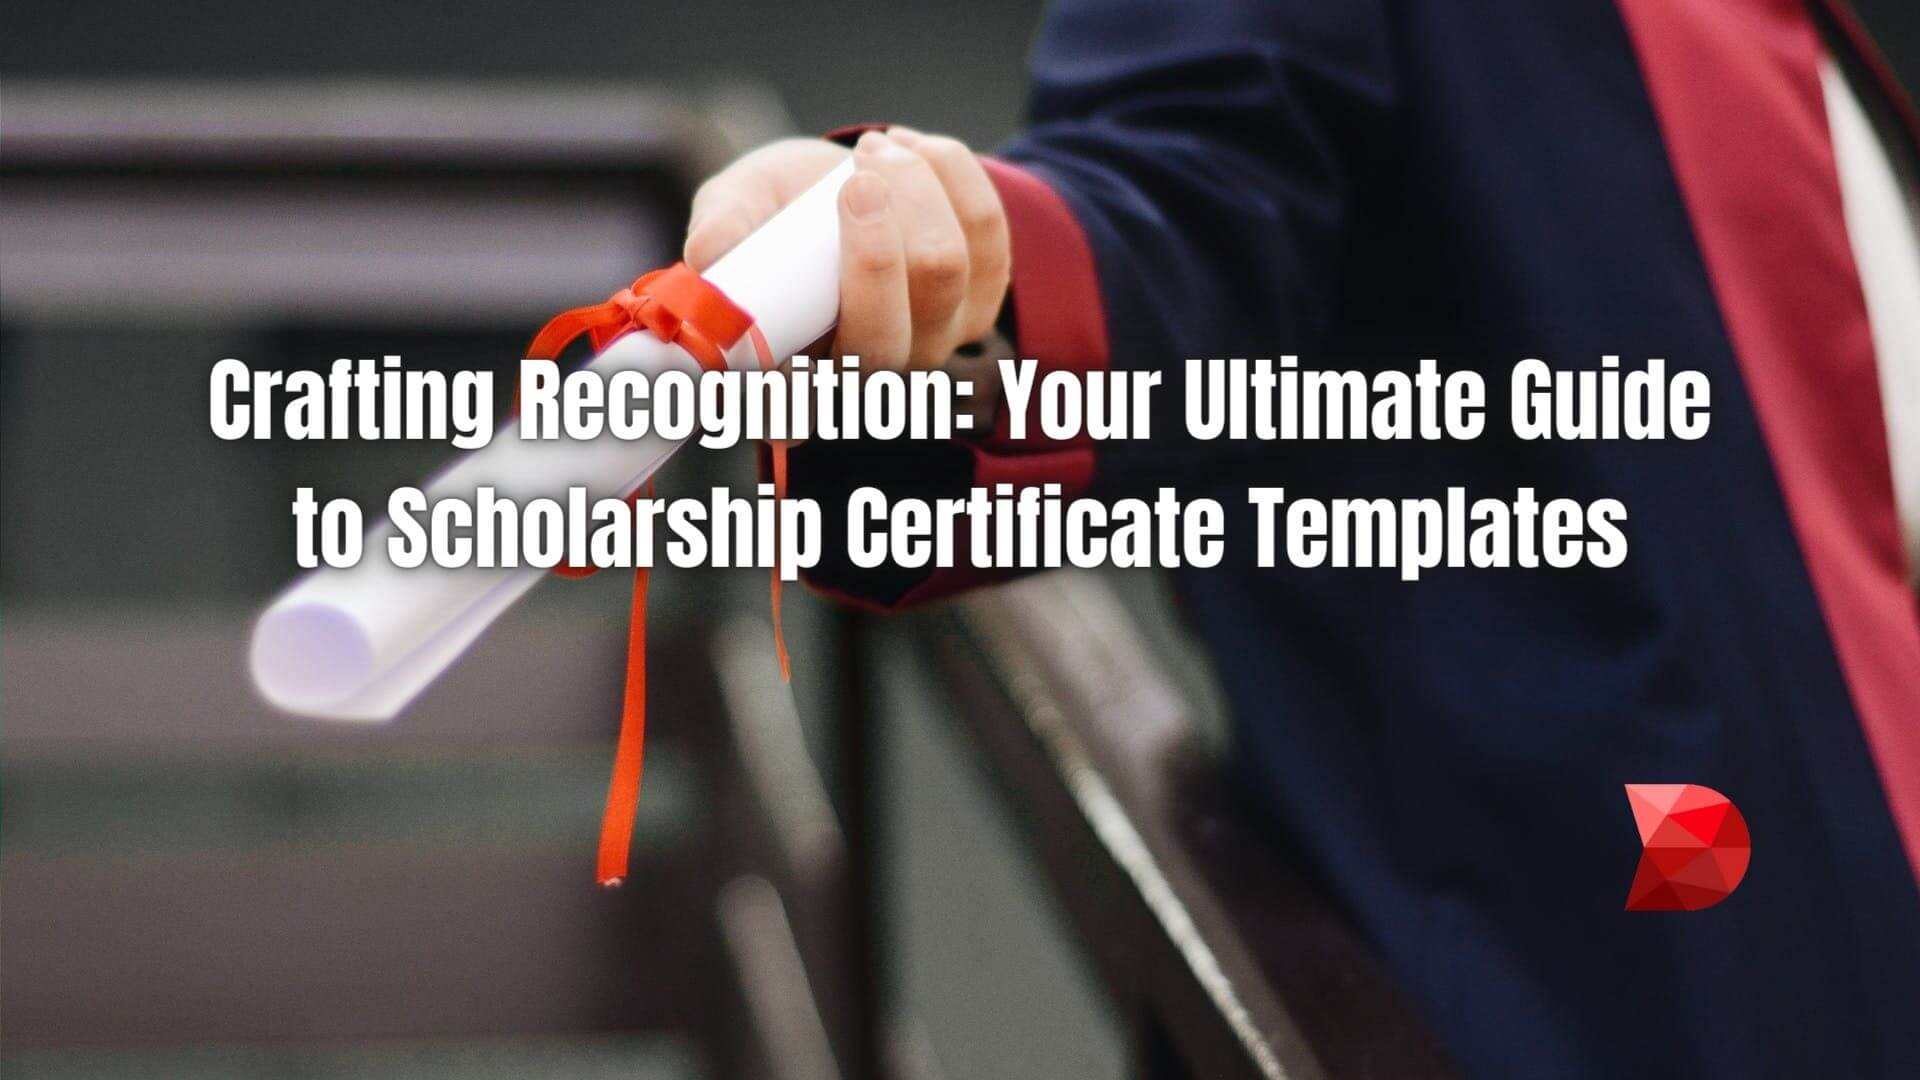 Unlock opportunities with this comprehensive guide to scholarship certificate templates! Create impactful awards effortlessly. Learn more!